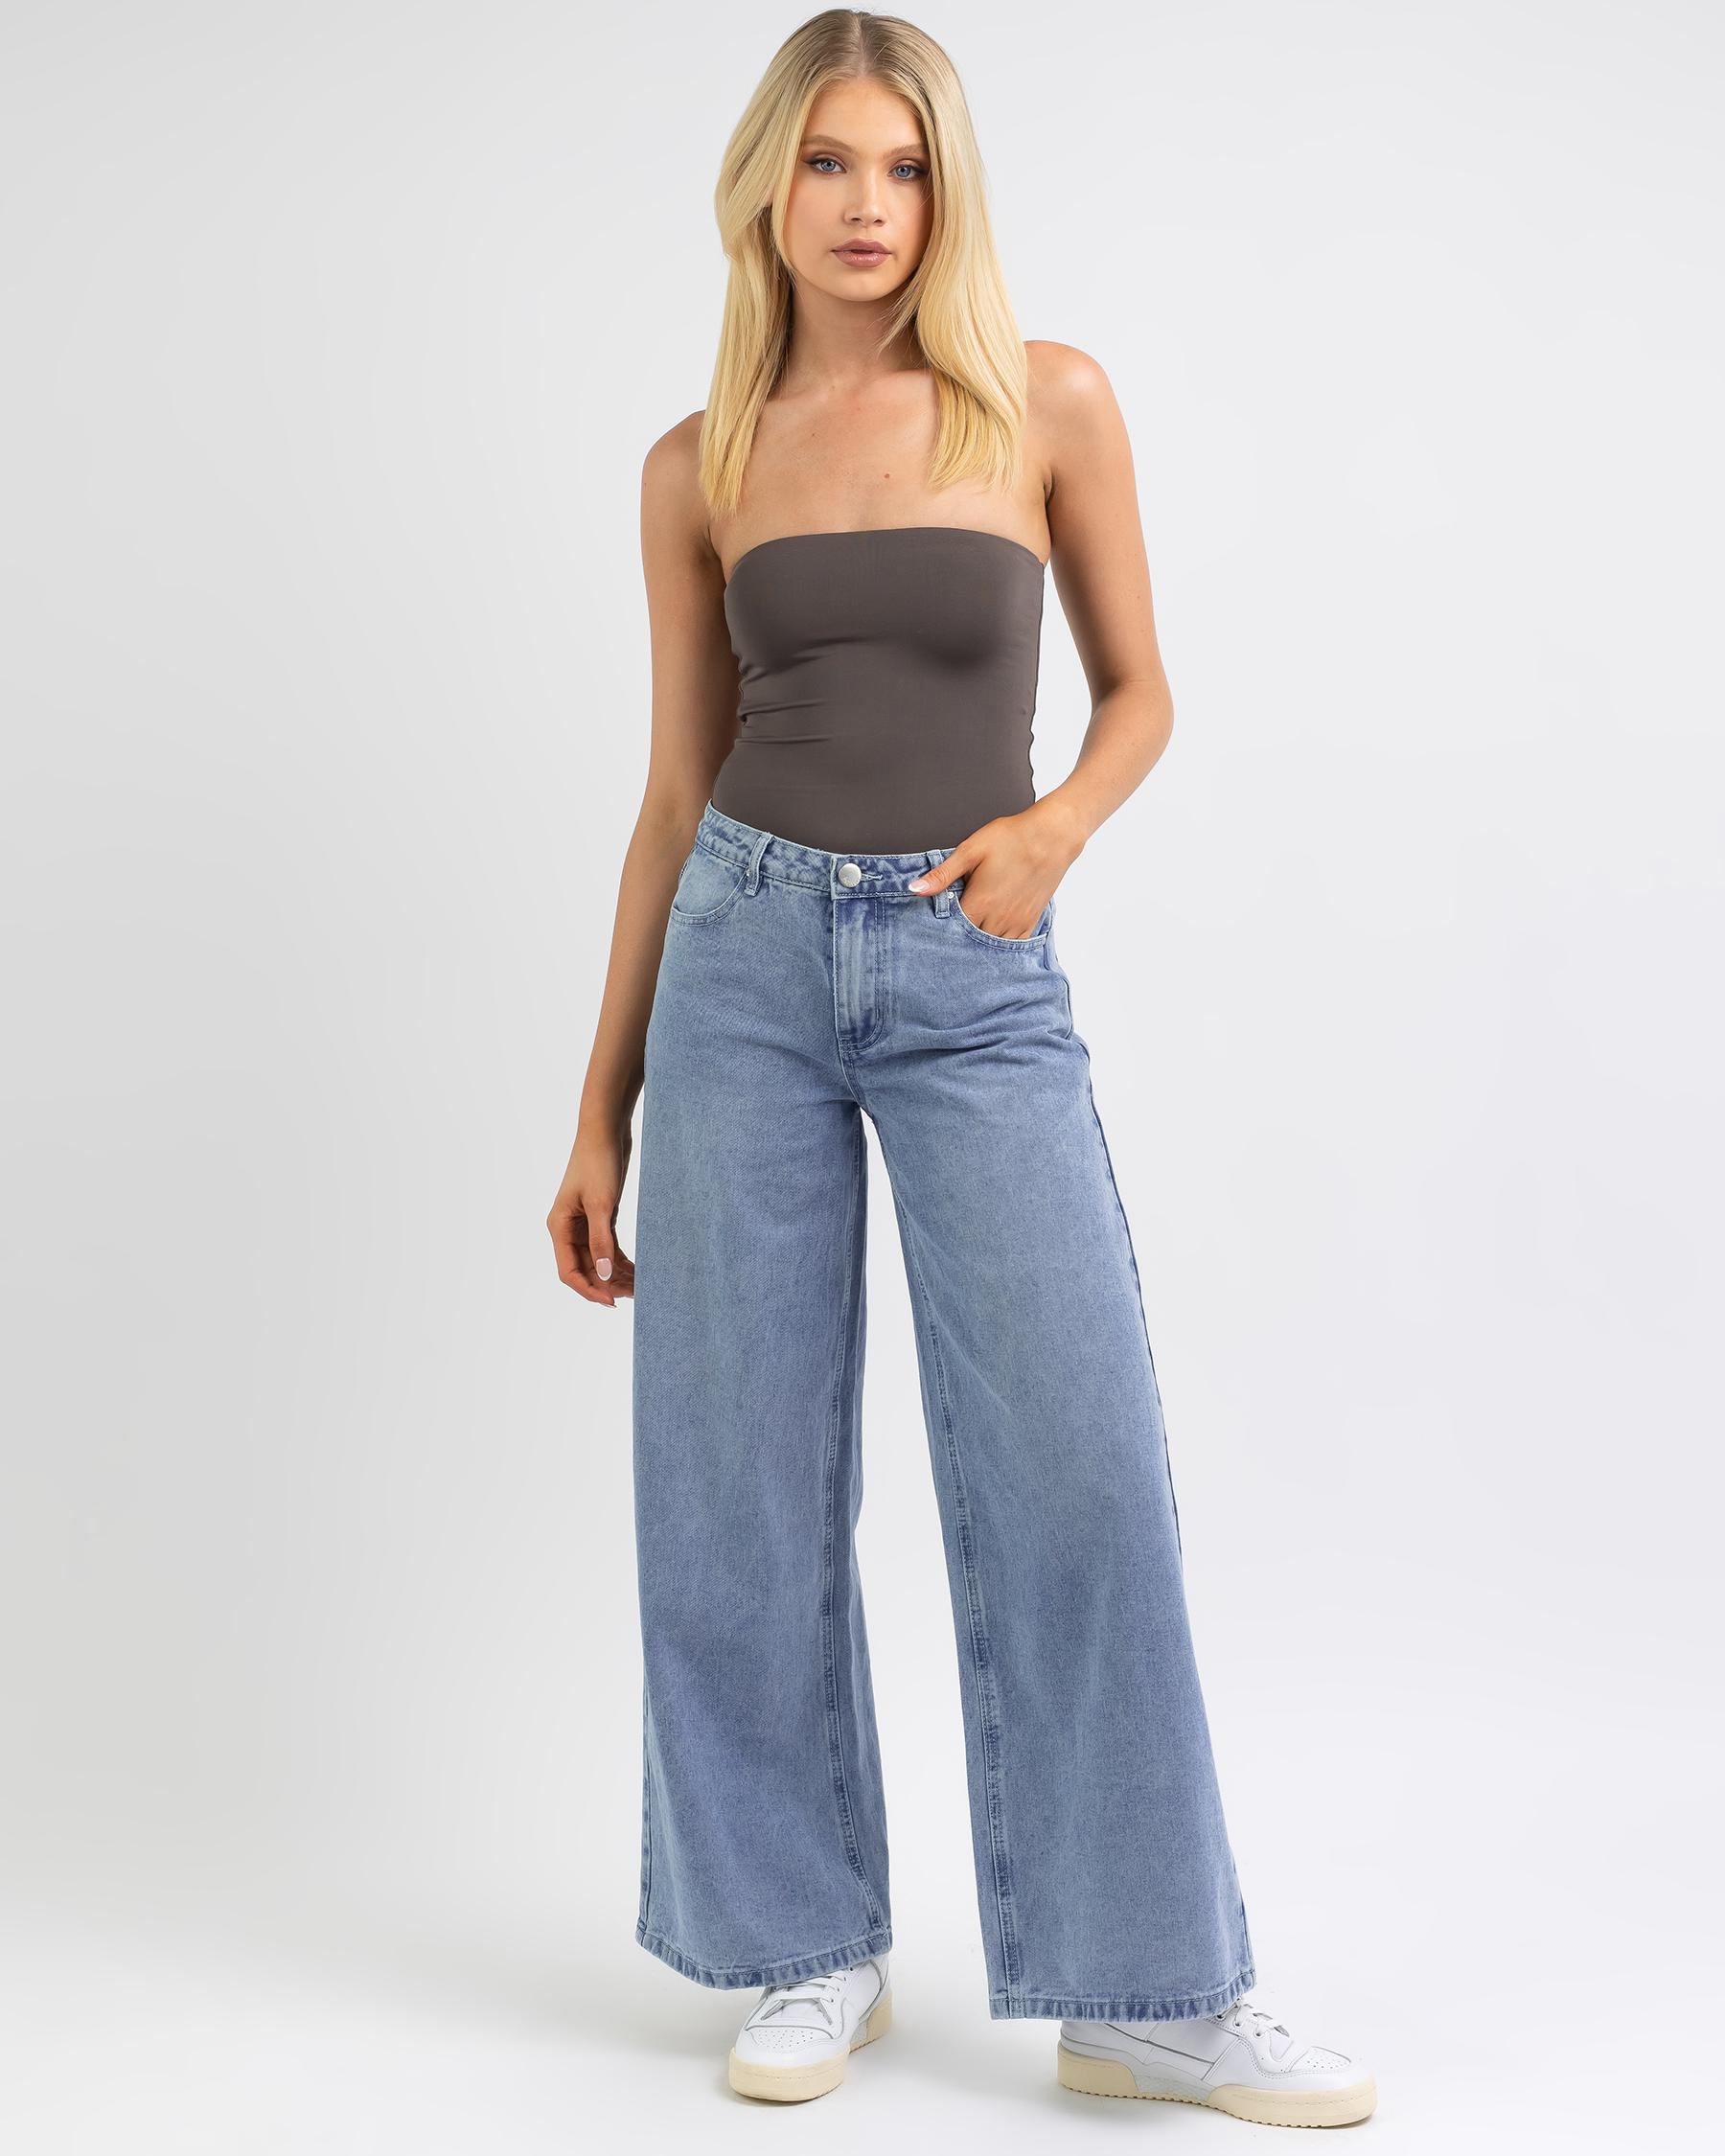 Mooloola Basic Tube Top In Charcoal - Fast Shipping & Easy Returns ...